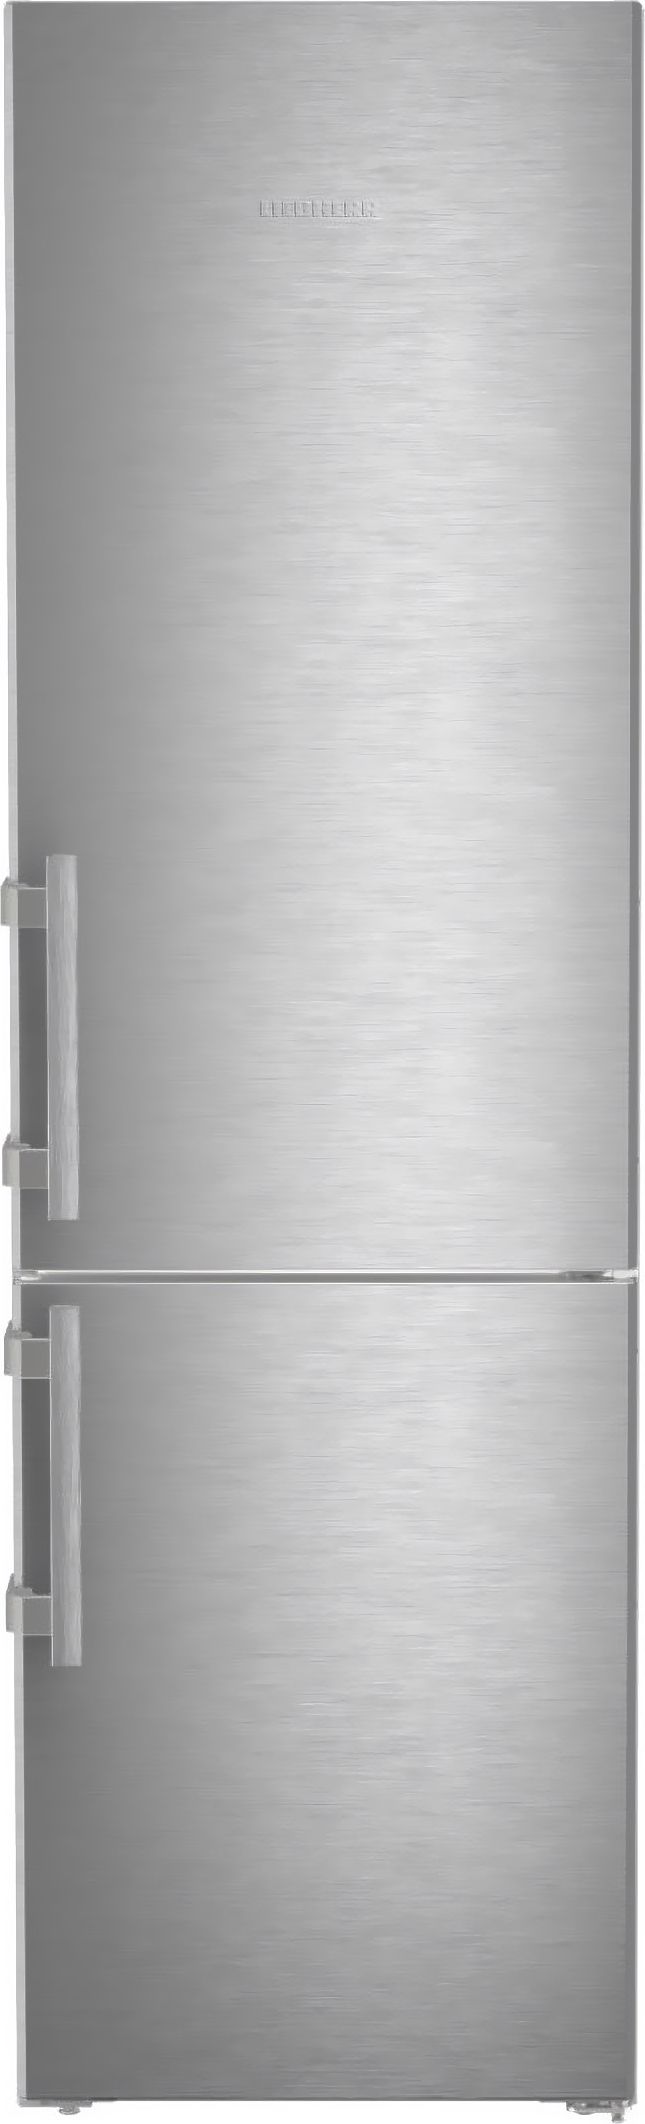 Liebherr Prime CBNsda5753 70/30 Frost Free Fridge Freezer - Silver - A Rated, Silver